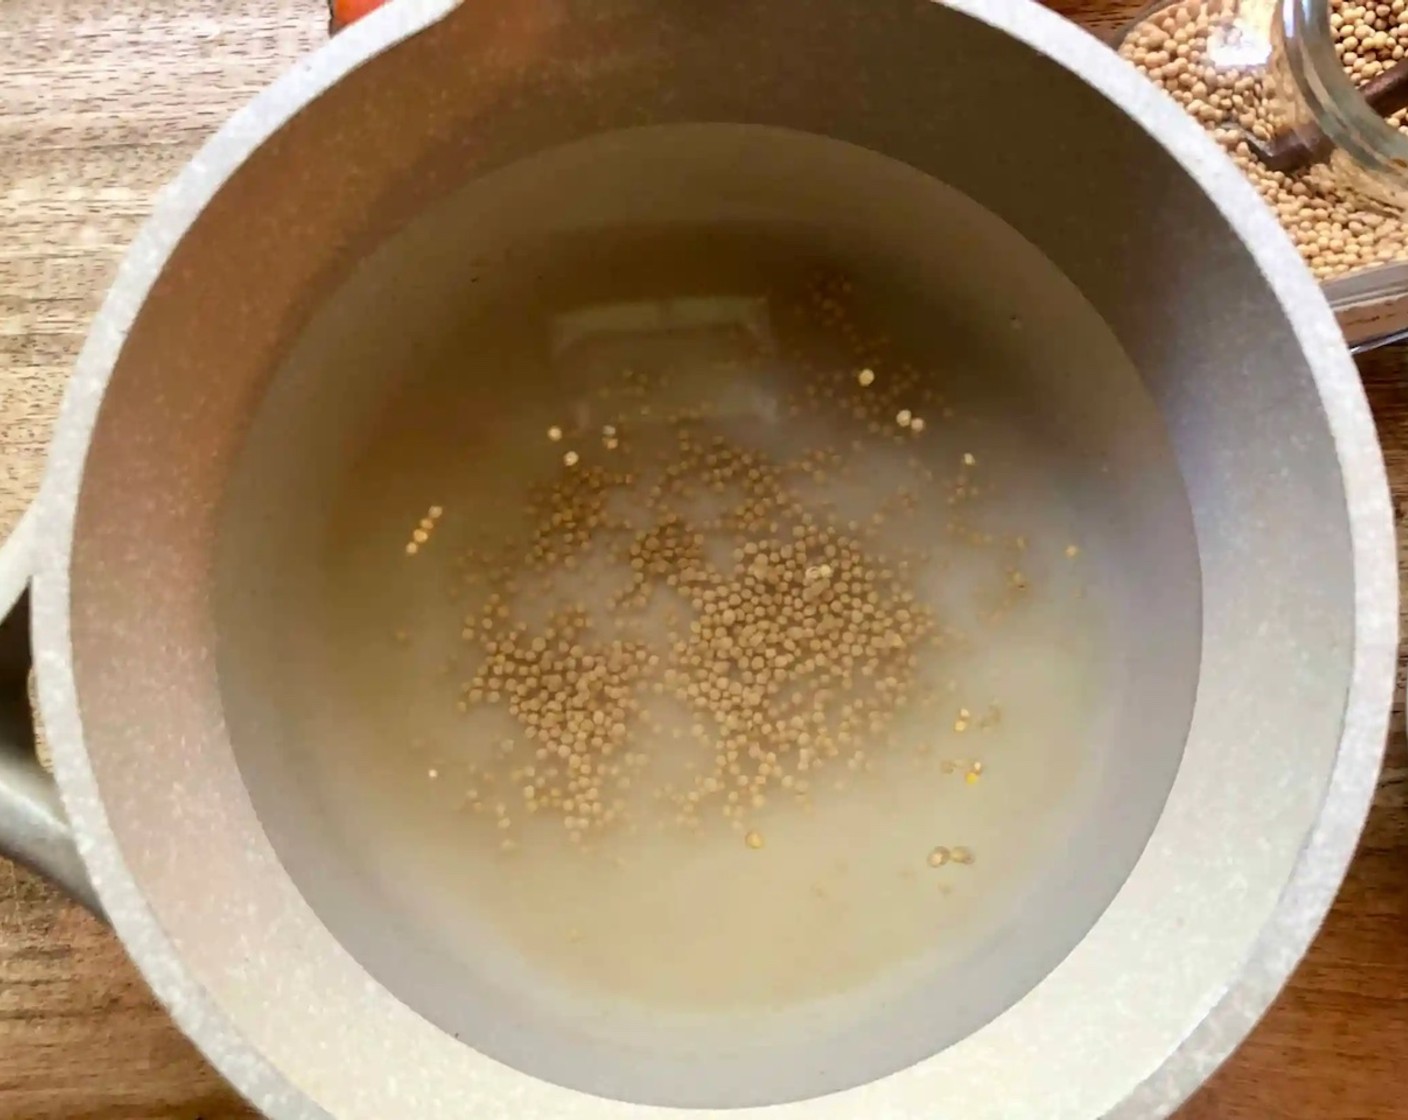 step 3 Combine Water (1 1/2 cups), Distilled White Vinegar (1 1/2 cups), Granulated Sugar (2 Tbsp), Salt (1 Tbsp), and Mustard Seeds (1 tsp) in a small pot. Bring to a boil over high heat, stirring occasionally to be sure the sugar and salt are completely dissolved.